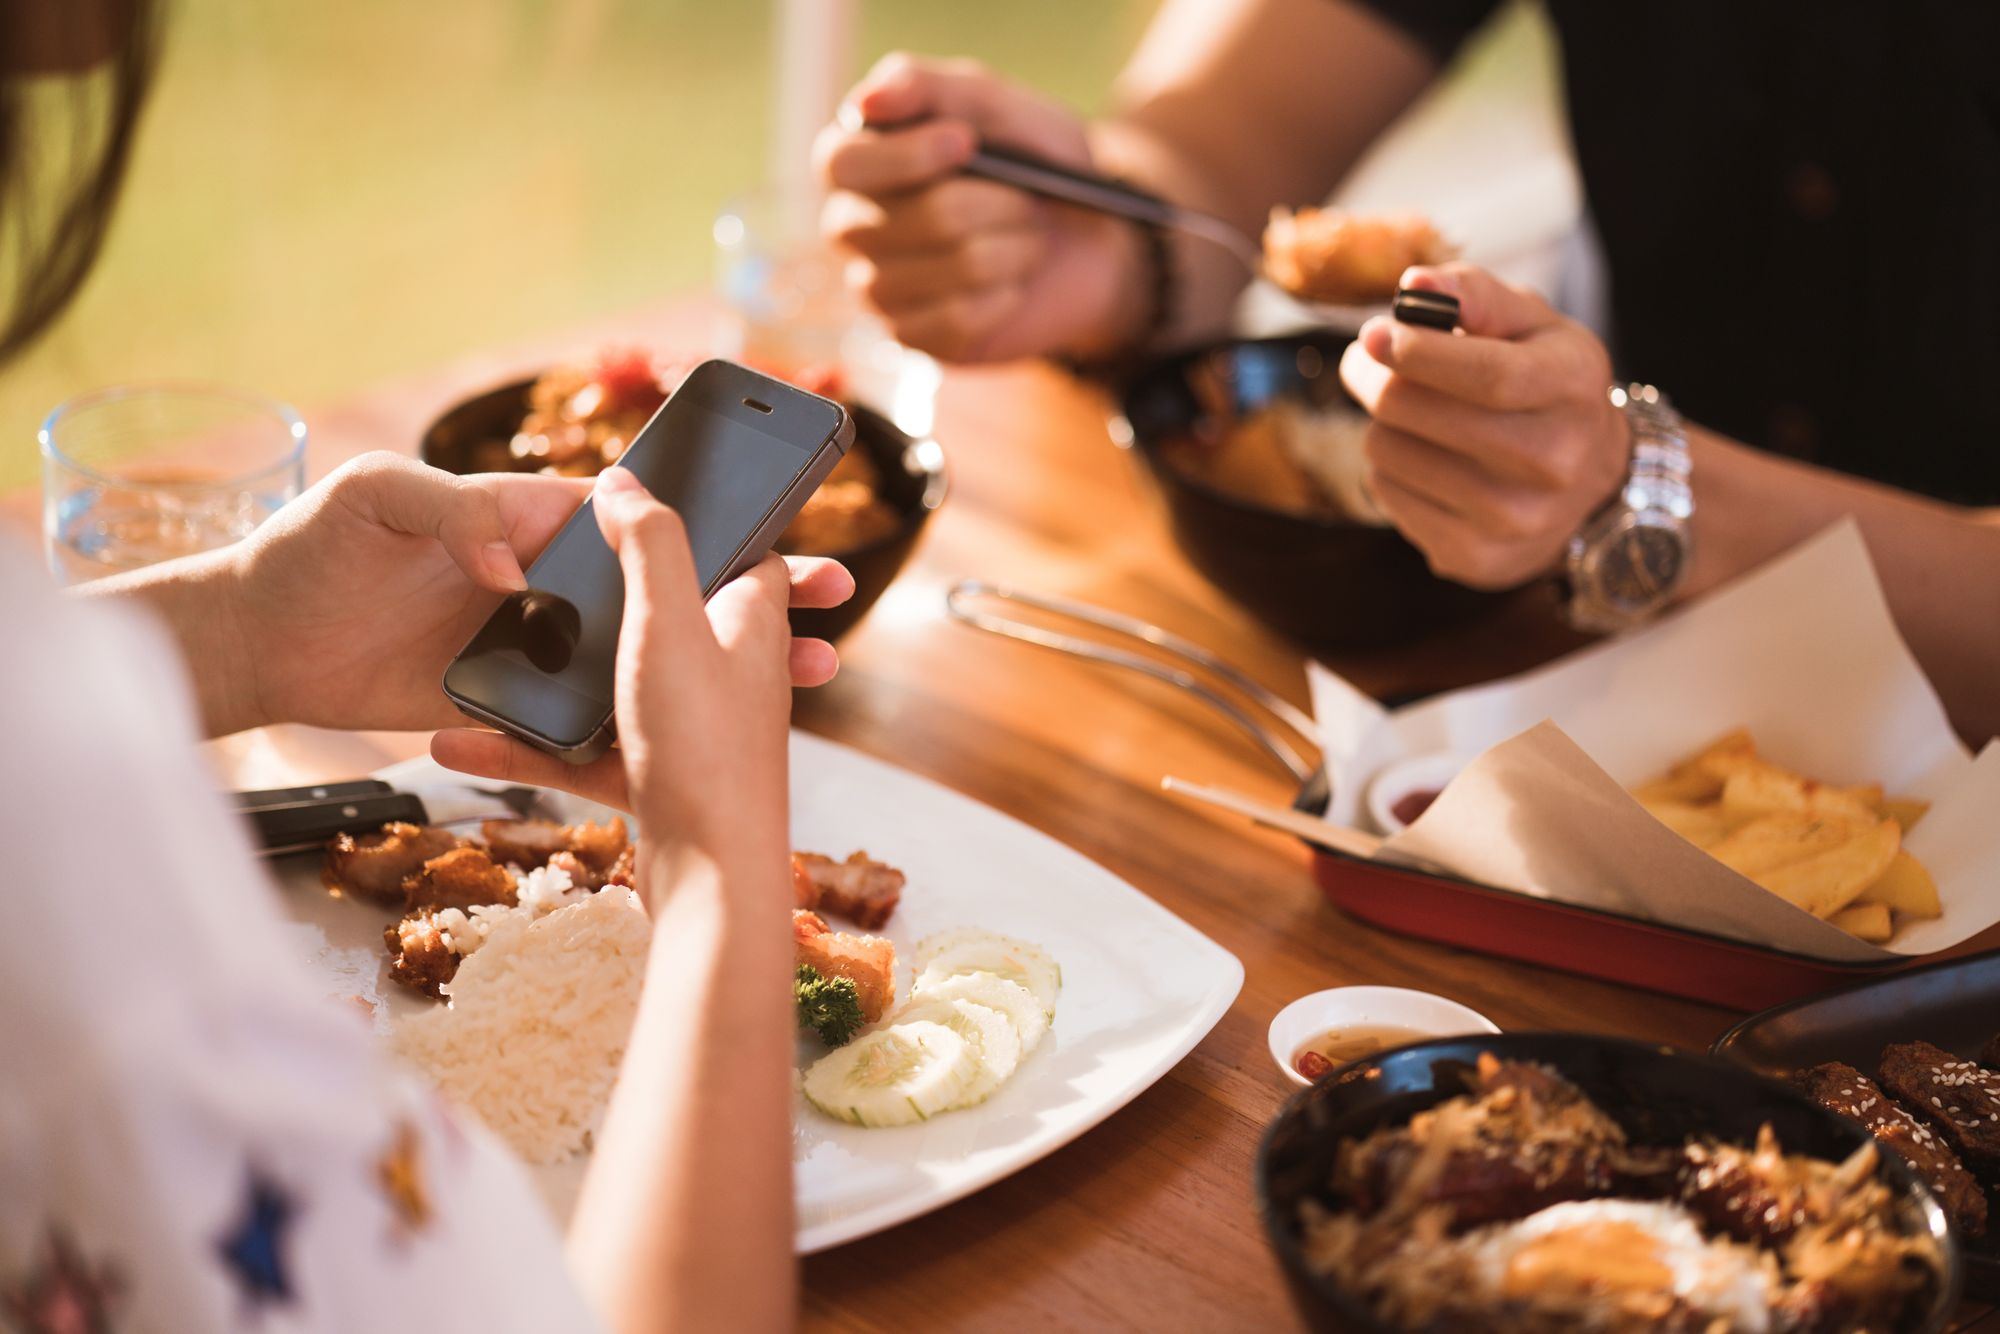 Using your phone while eating by TORWAISTUDIO | www.shutterstock.com